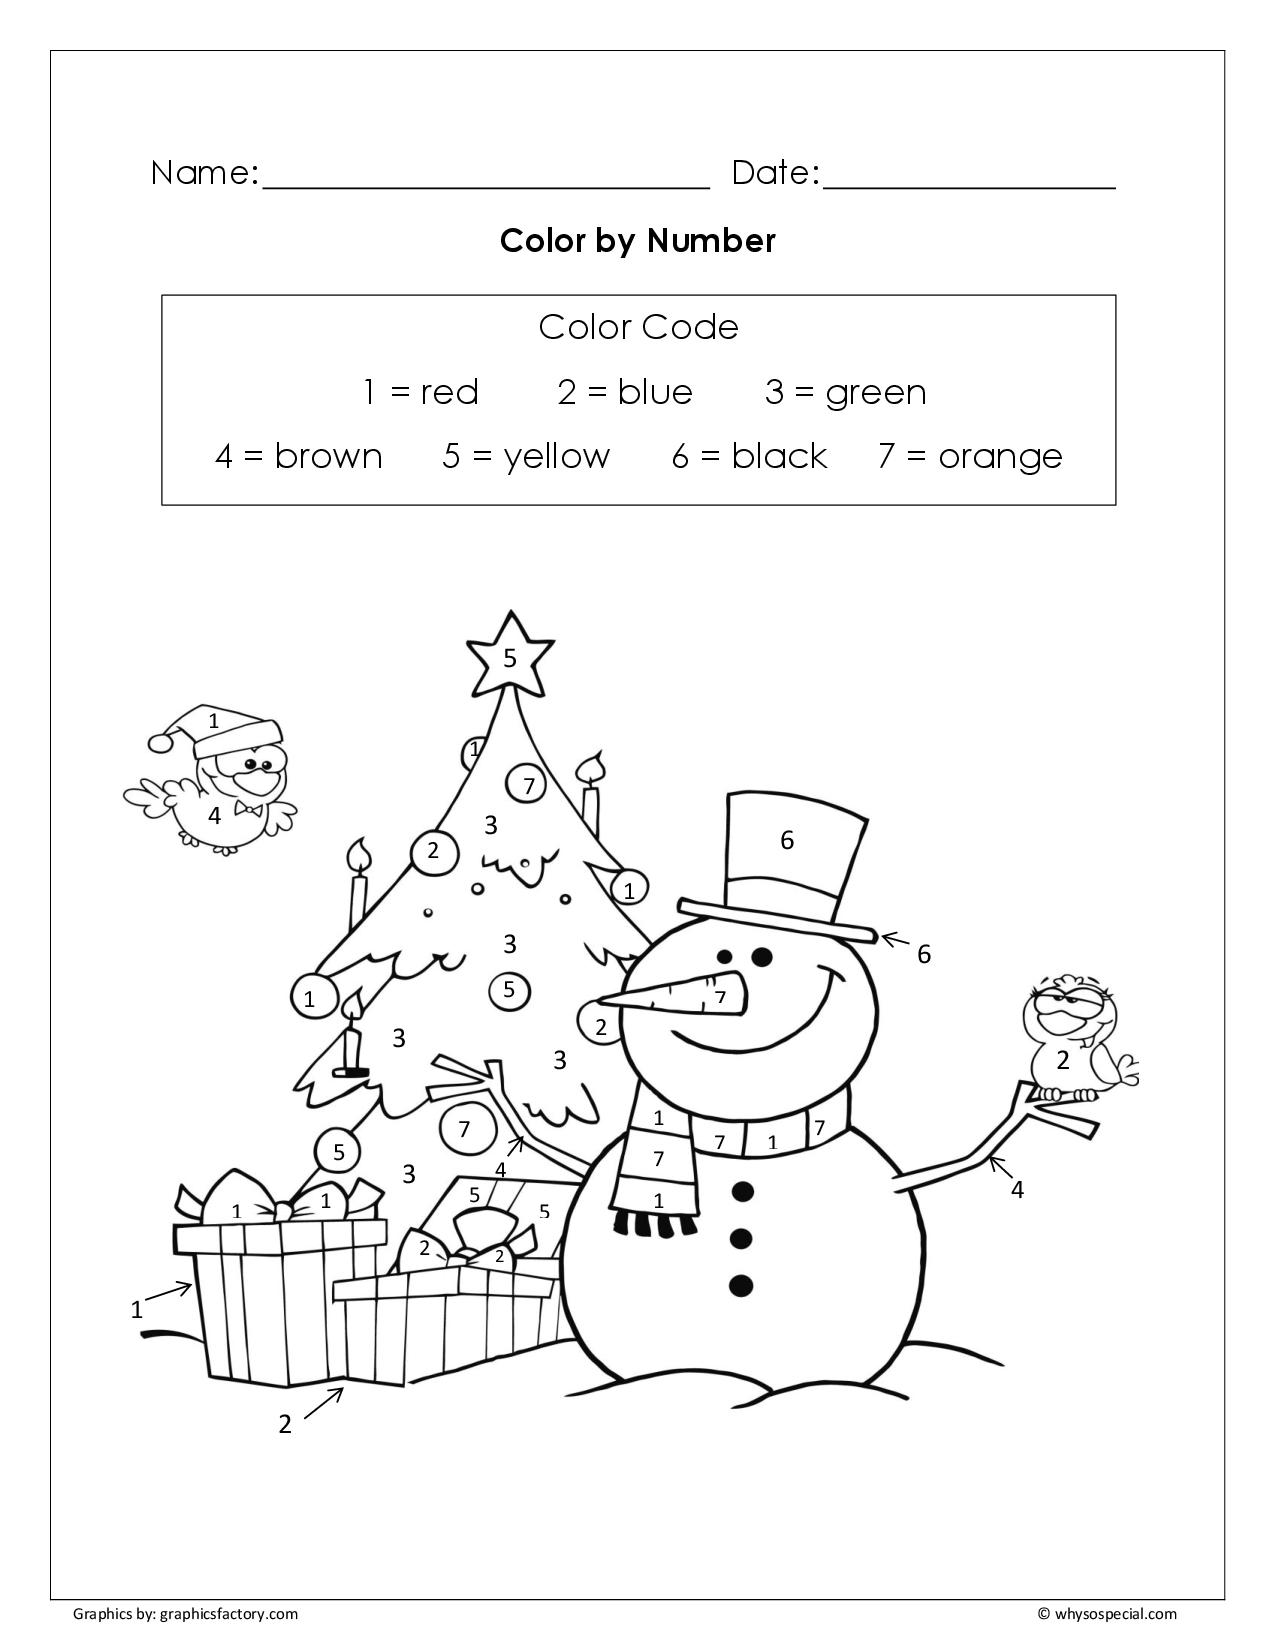 16 Best Images of Get To Know Students Worksheet - All ...